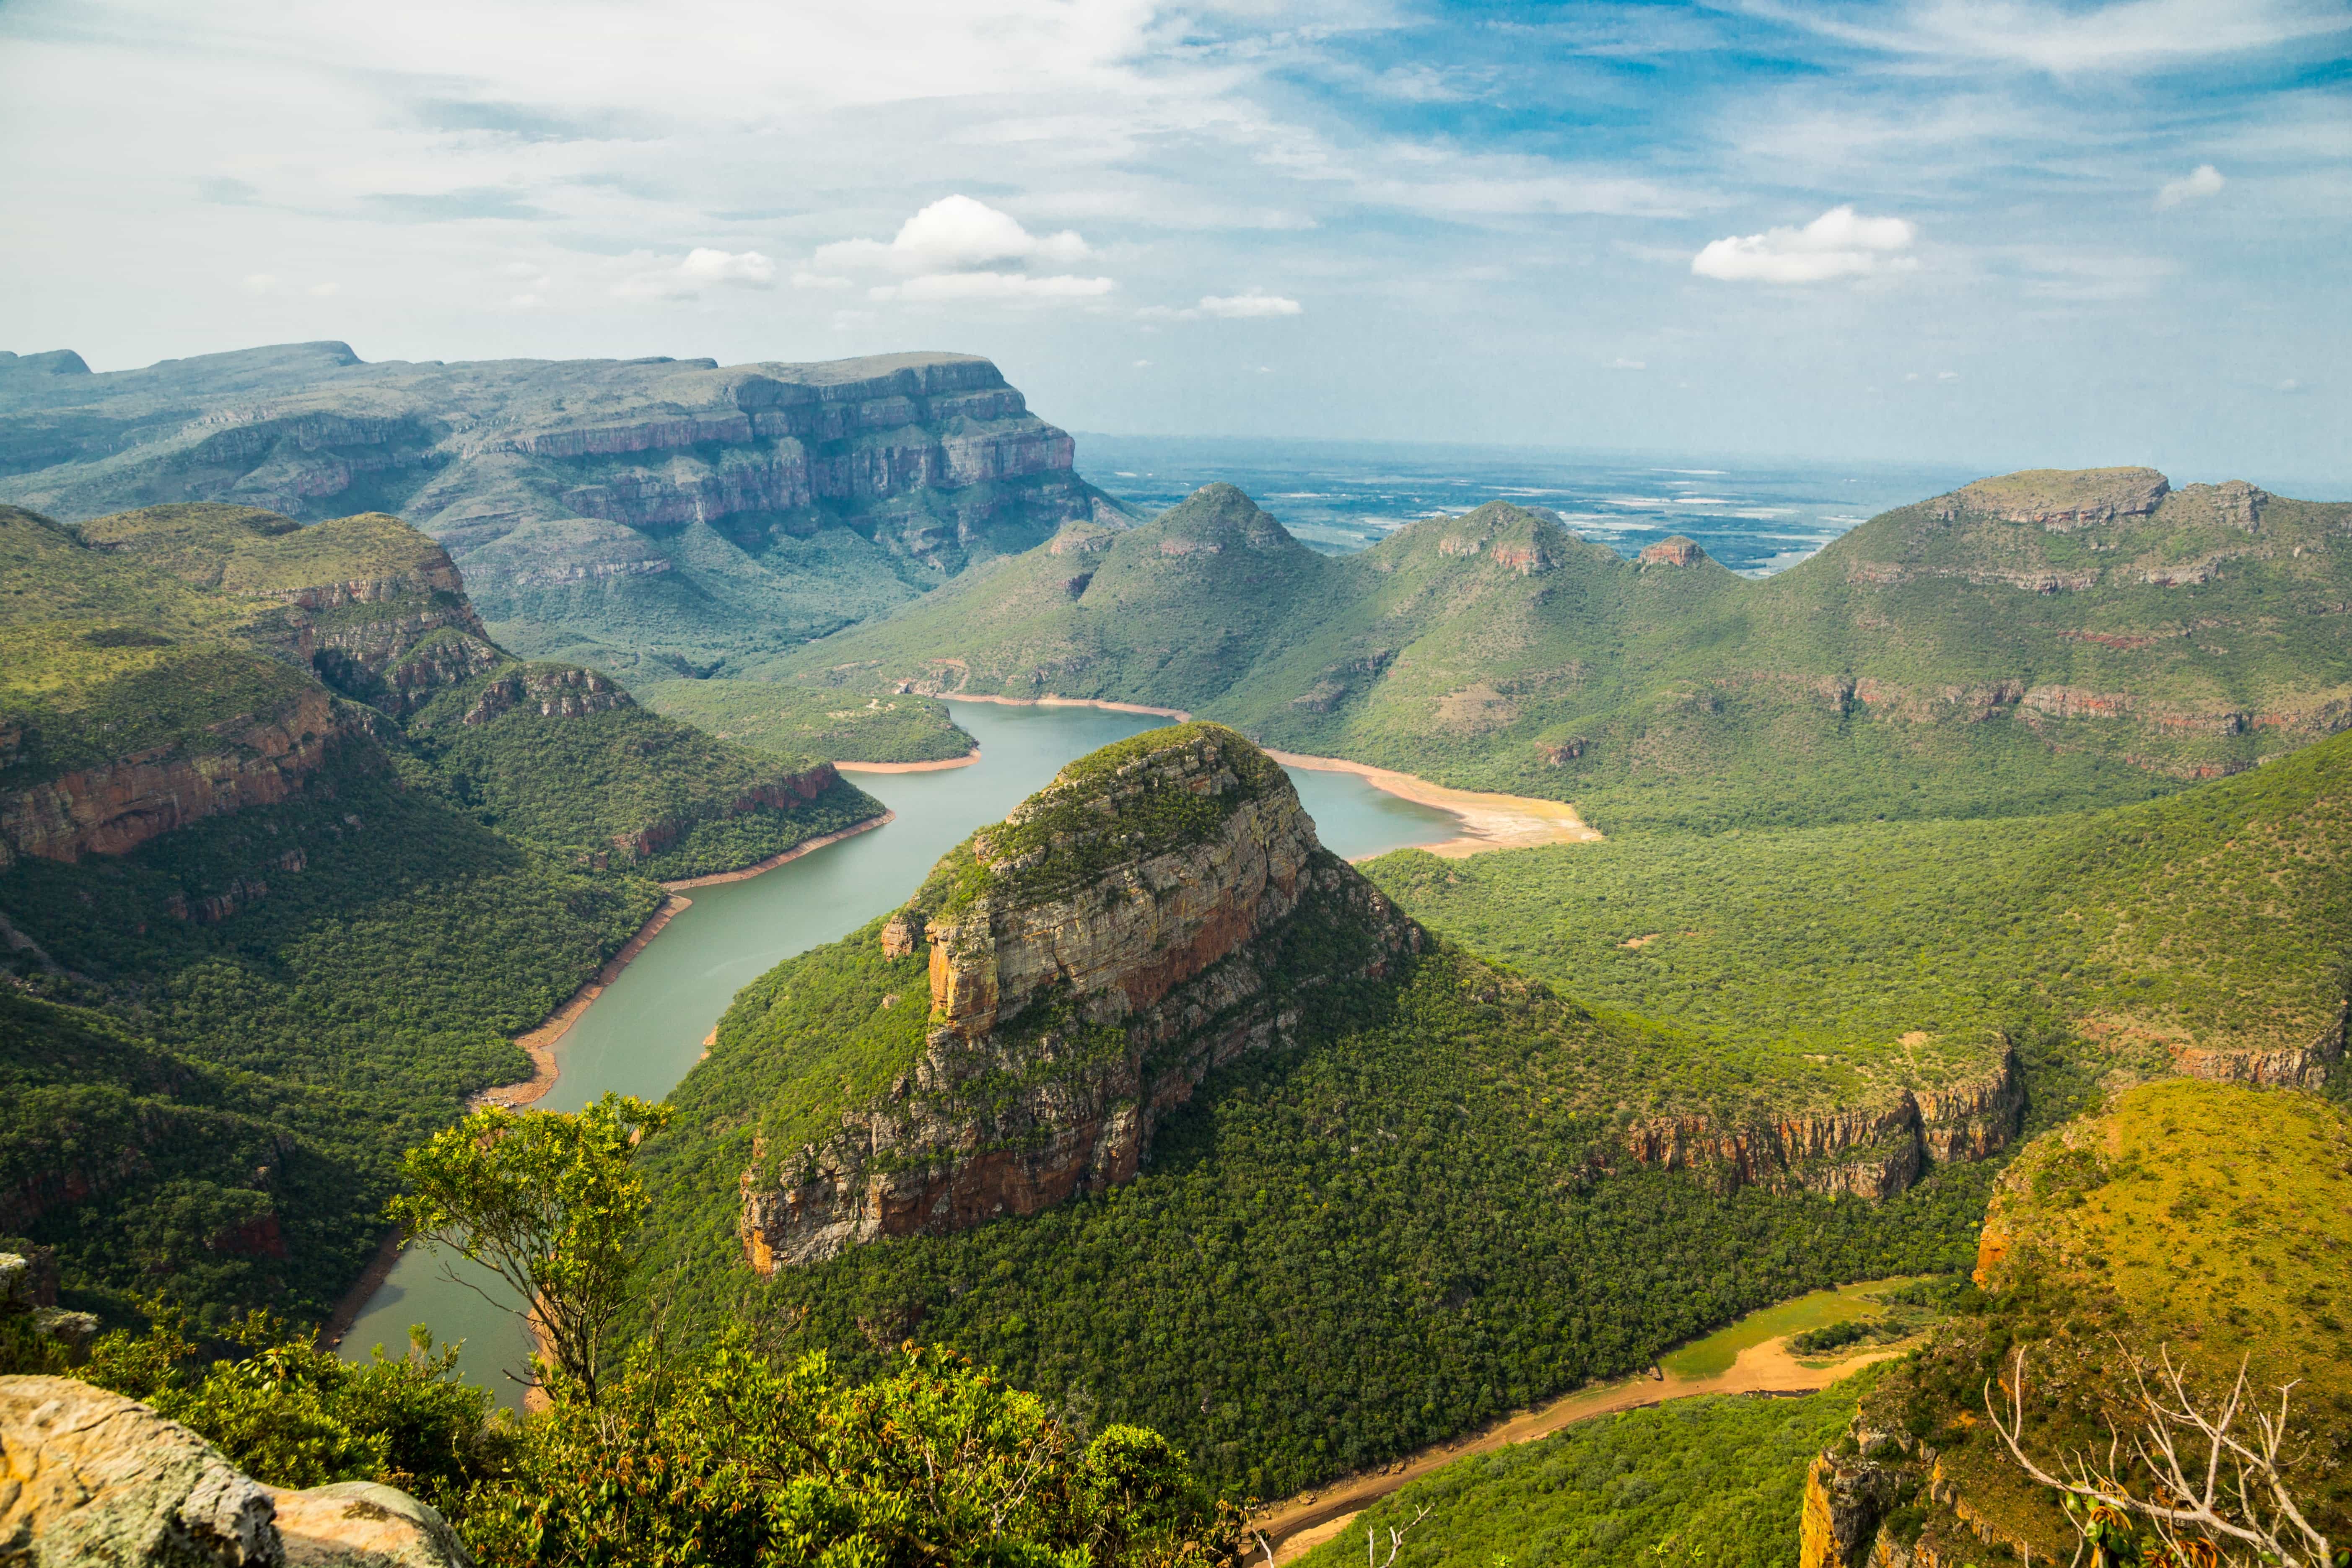 Things to do in Mpumalanga